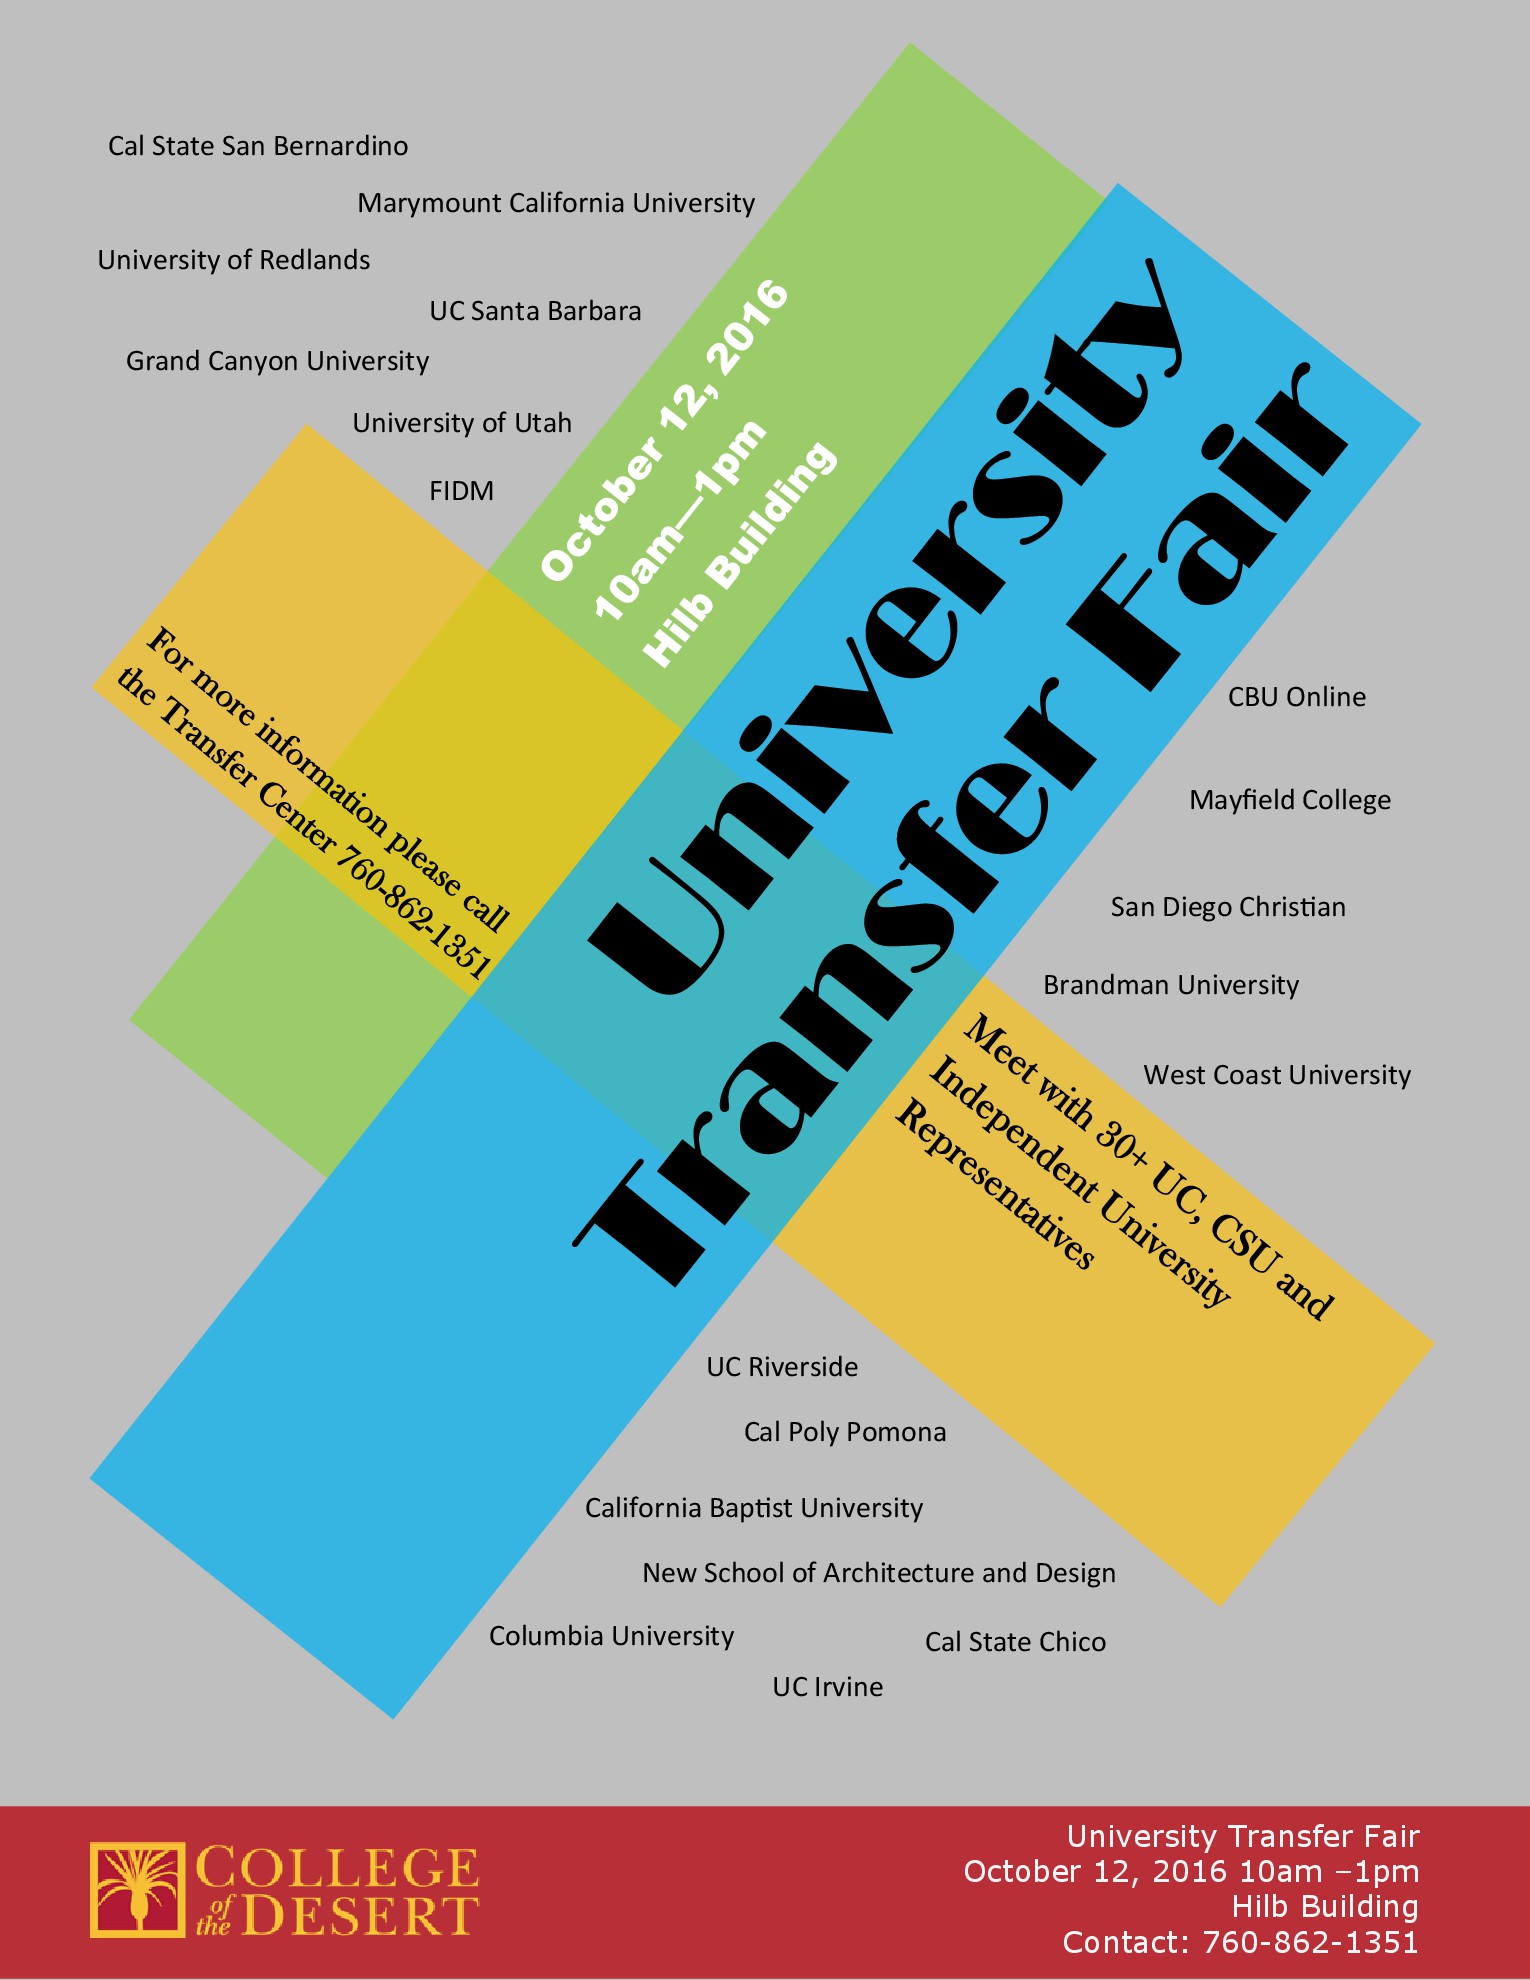 2016 Fall Transfer Fair on Wednesday, October 12, 2016 from 10am to 1pm in the Hilb Building